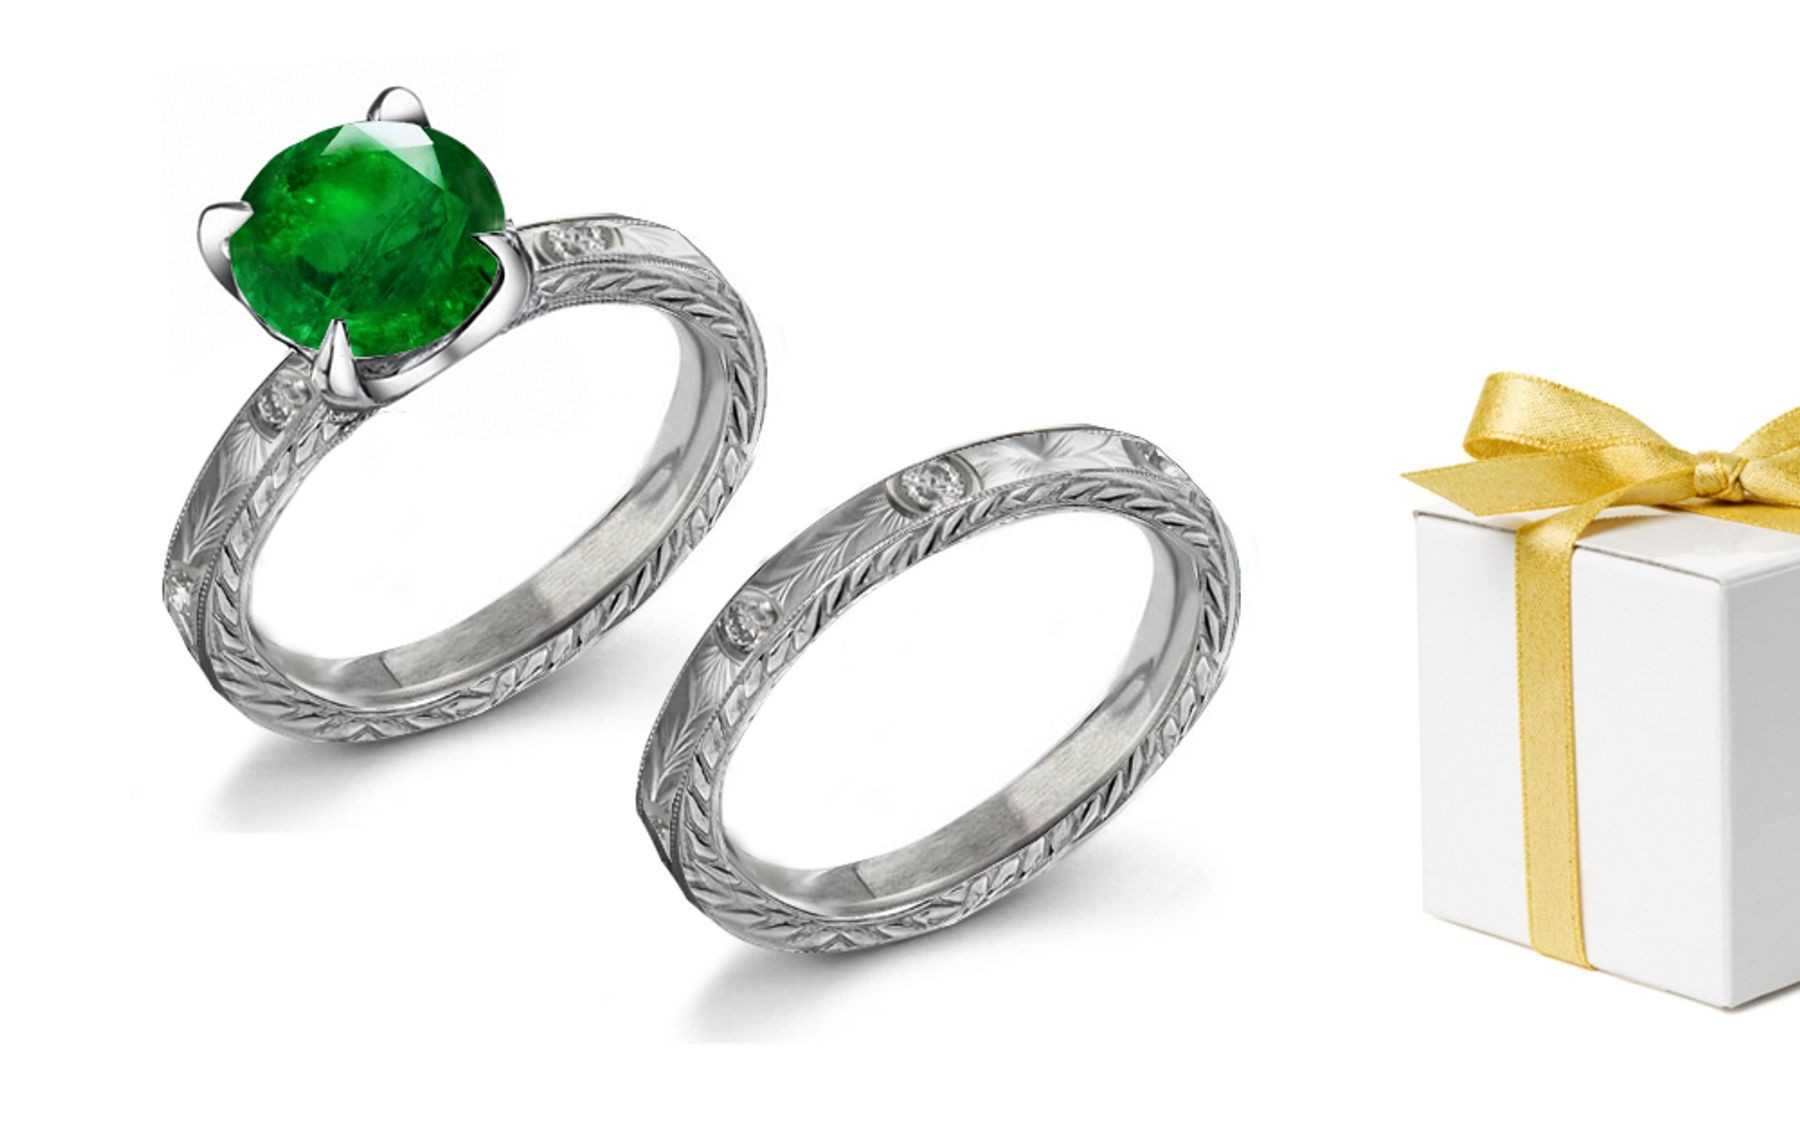 To Cherish Forever: Tradional Emerald & Diamond Solitaire Ring and Hand Engraved & Decorated Contours Platinum Band